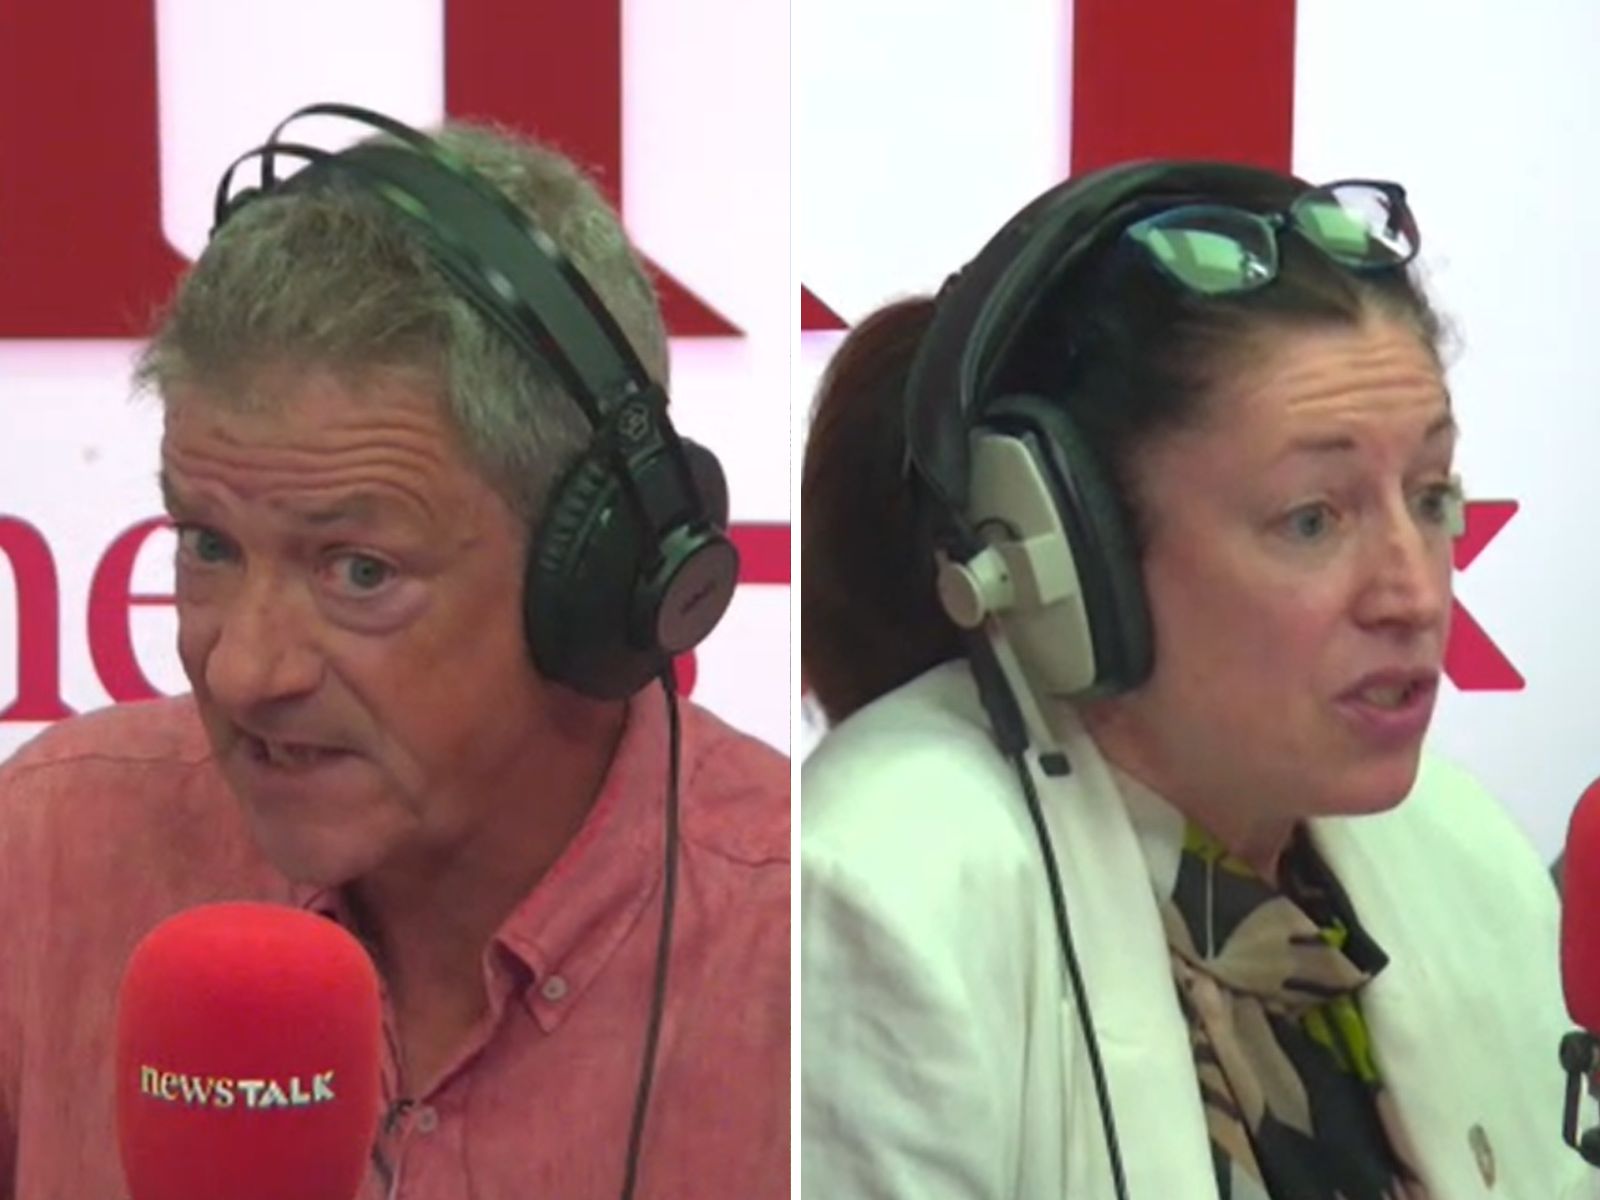 Split-screen image shows Conor Faughnan and Sadhbh O'Neill speaking on The Pat Kenny Show in Newstalk studios.